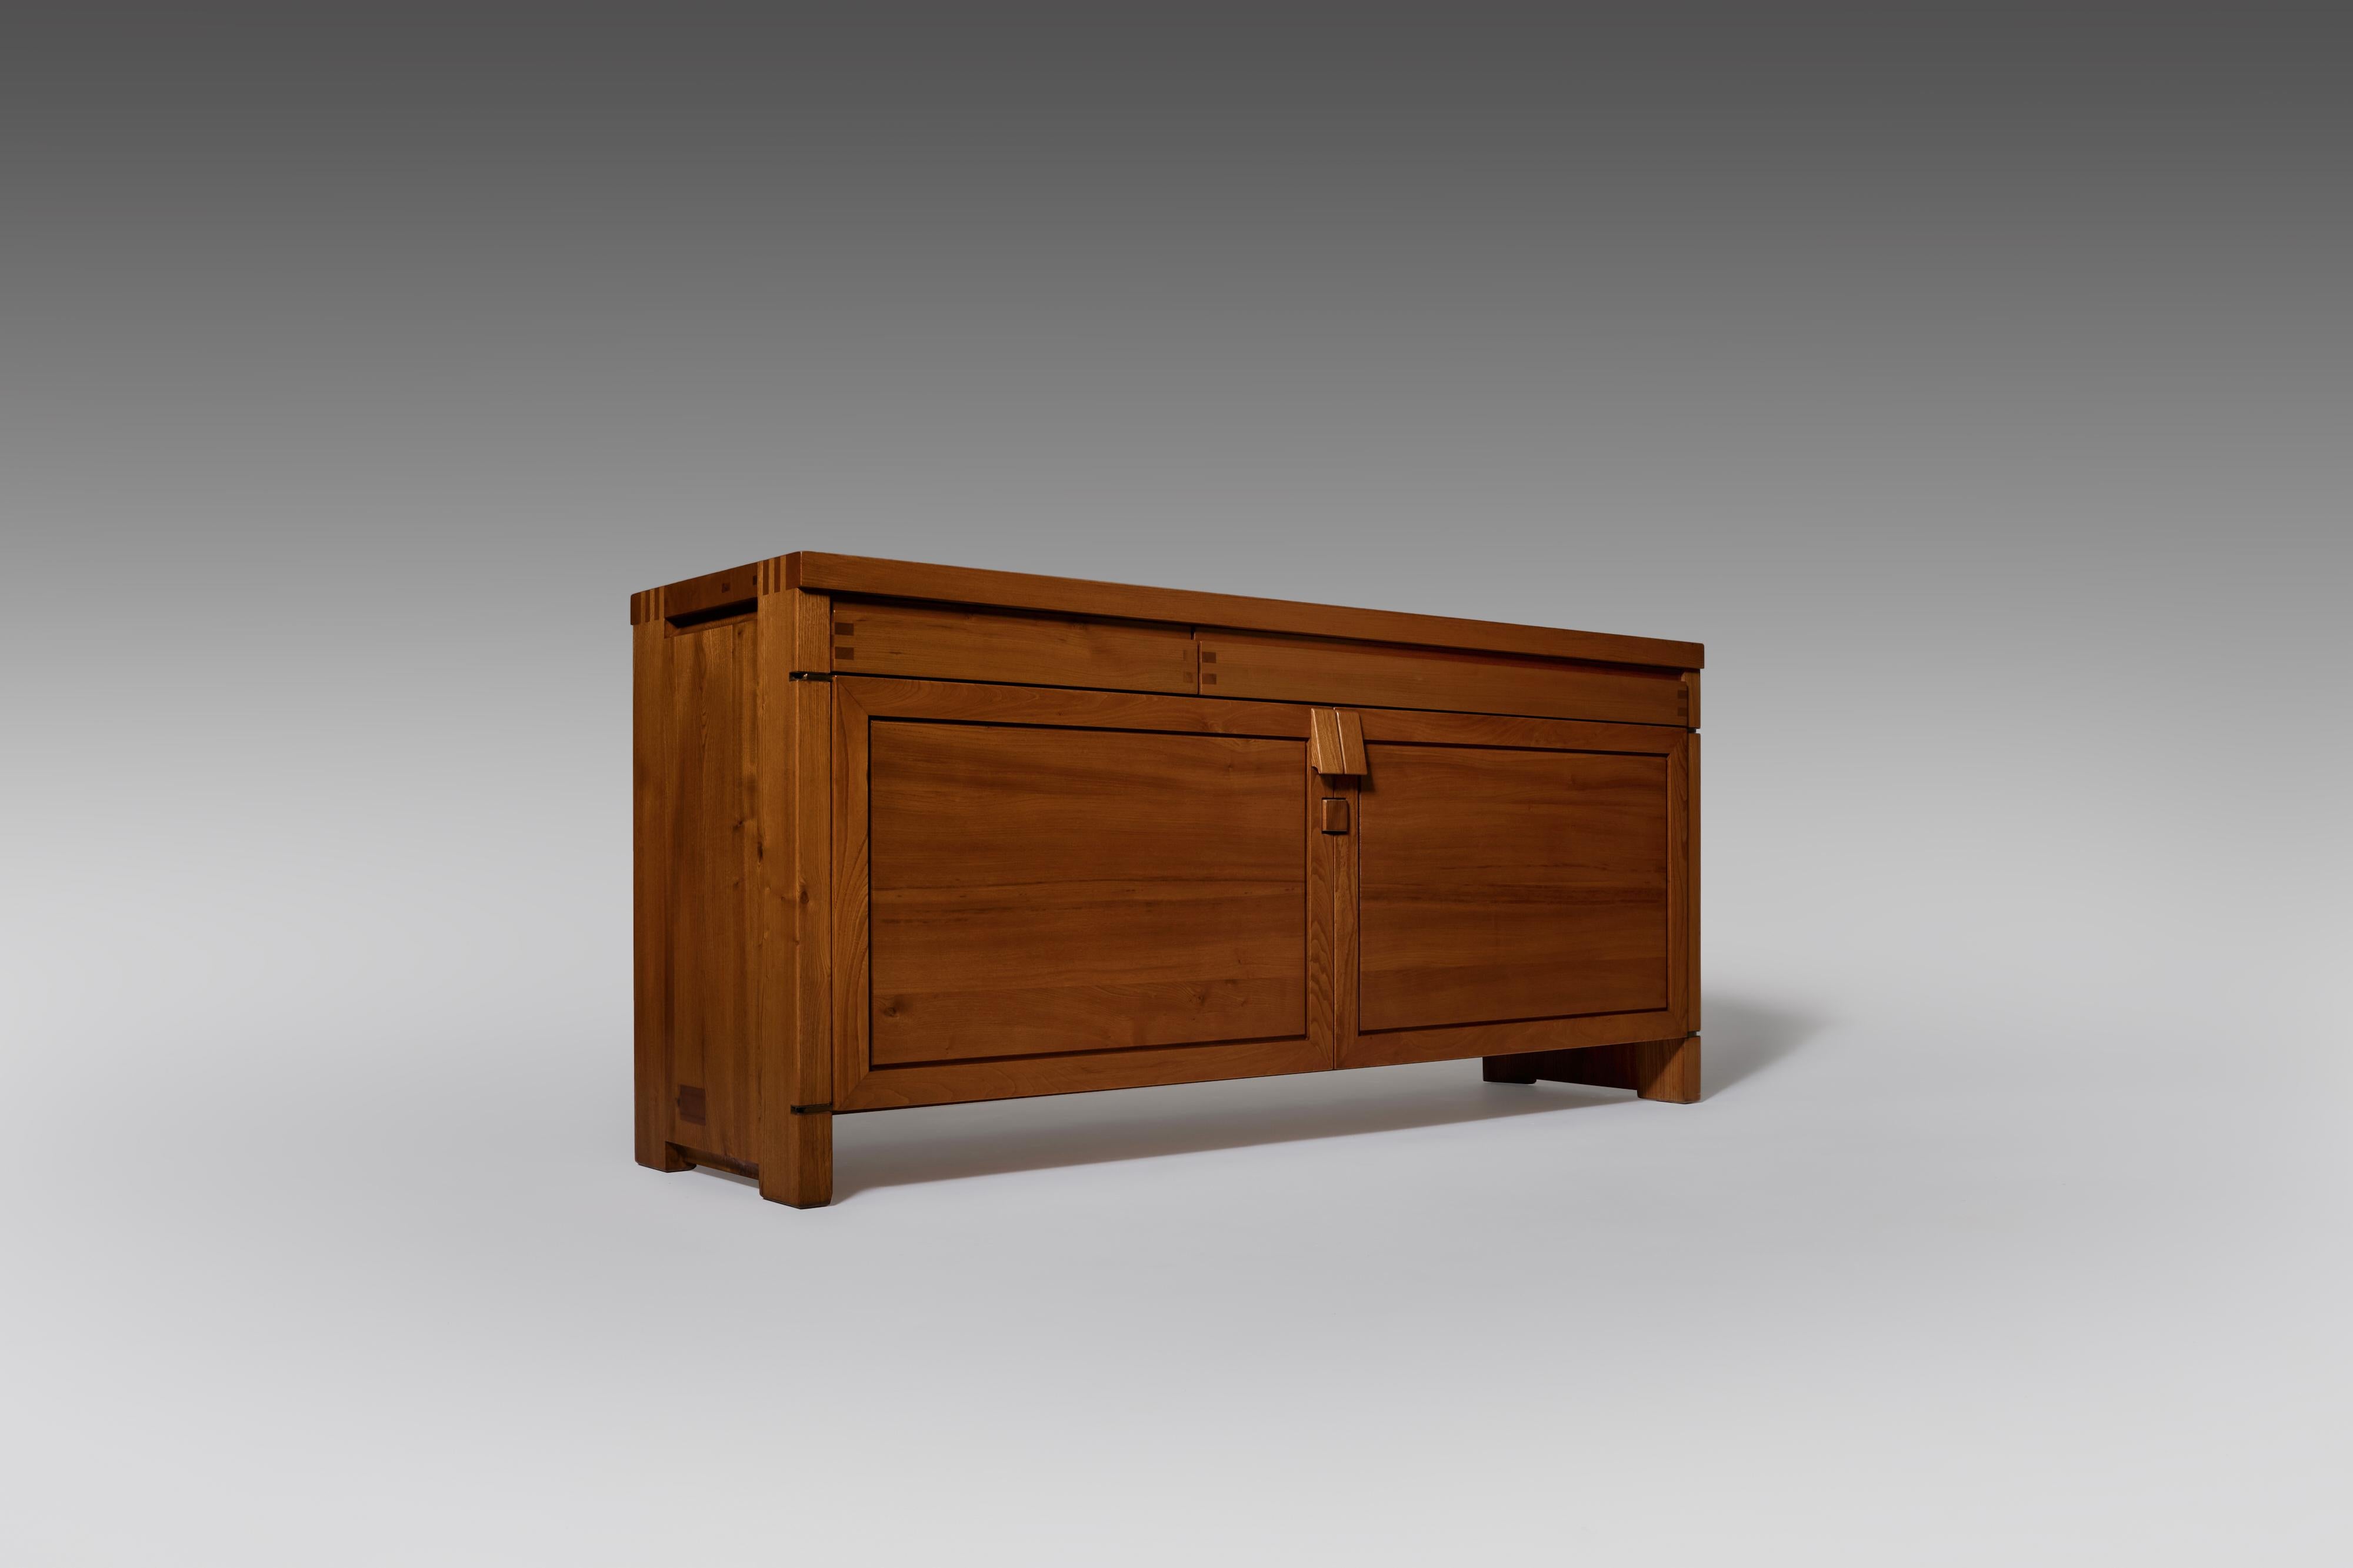 Impressive sideboard mod. 'R08' by Pierre Chapo, France, 1970. Remarkable design crafted out of solid French Elm. Sturdy yet refined design with many beautiful complex artisan details such as the wood-joint connections and special cut outs,